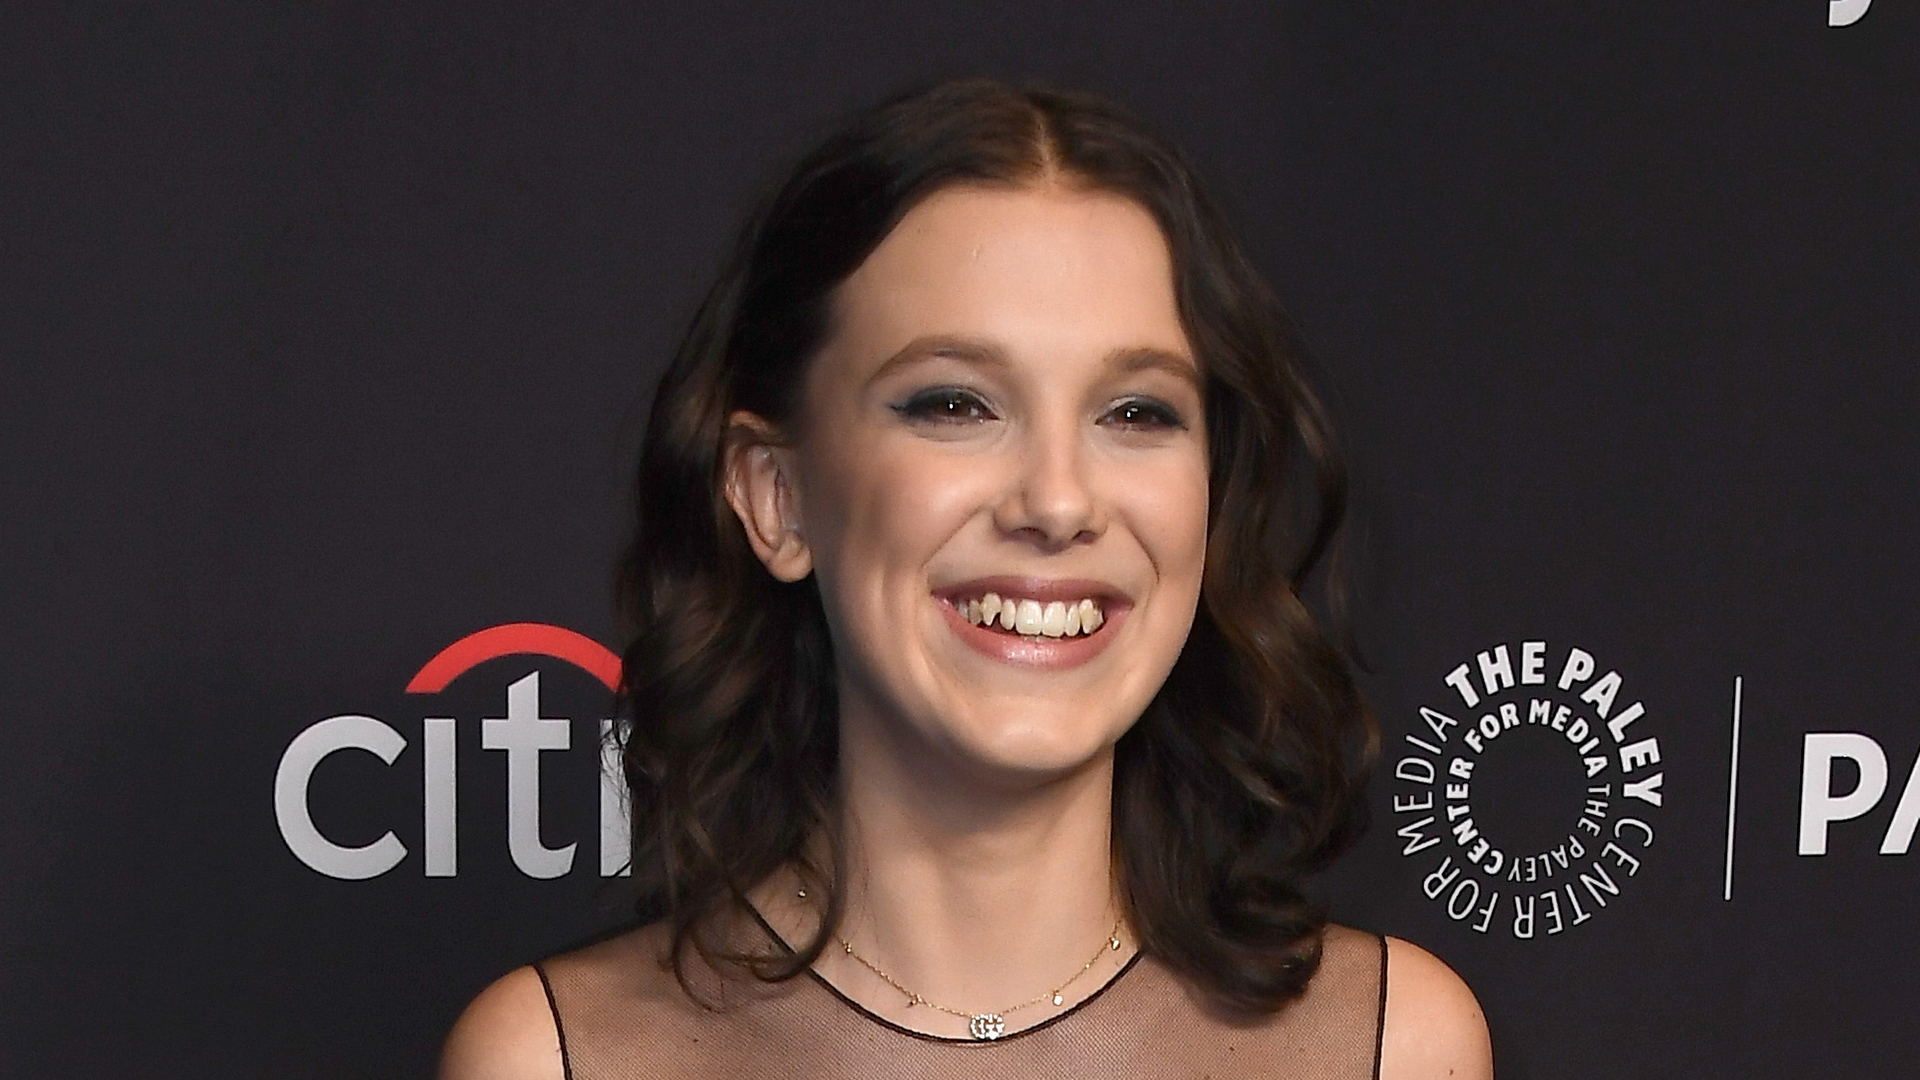 Millie Bobby Brown Smiling Wallpapers Wallpaper Cave